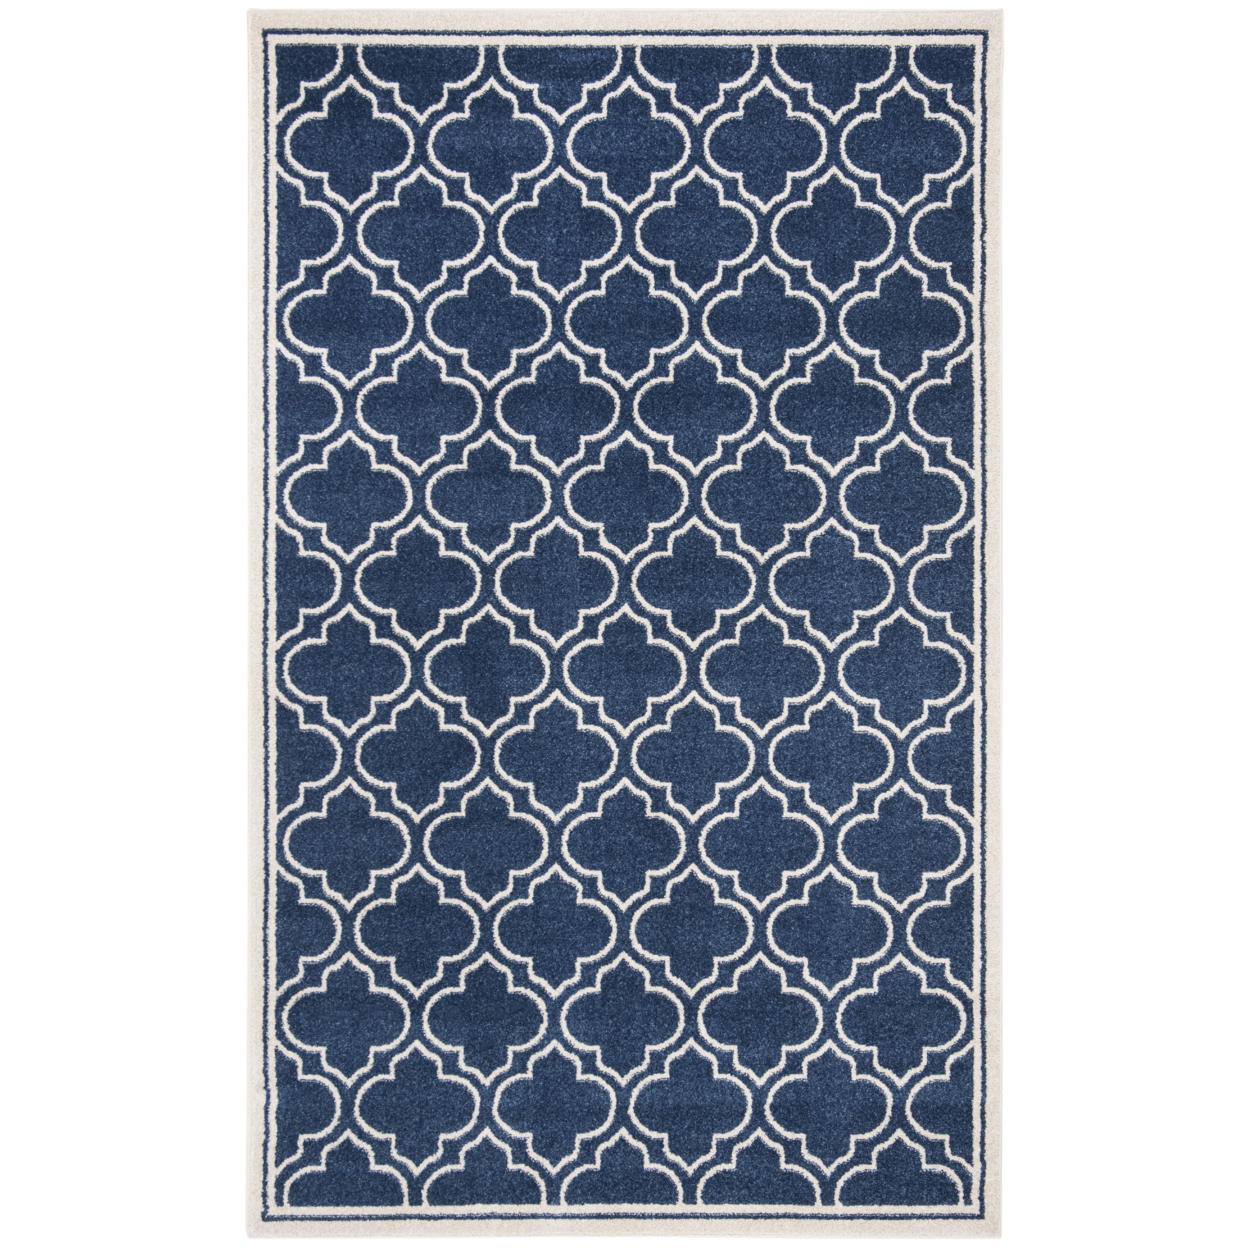 SAFAVIEH Amherst Collection AMT412P Navy / Ivory Rug - 5' 3 X 8'